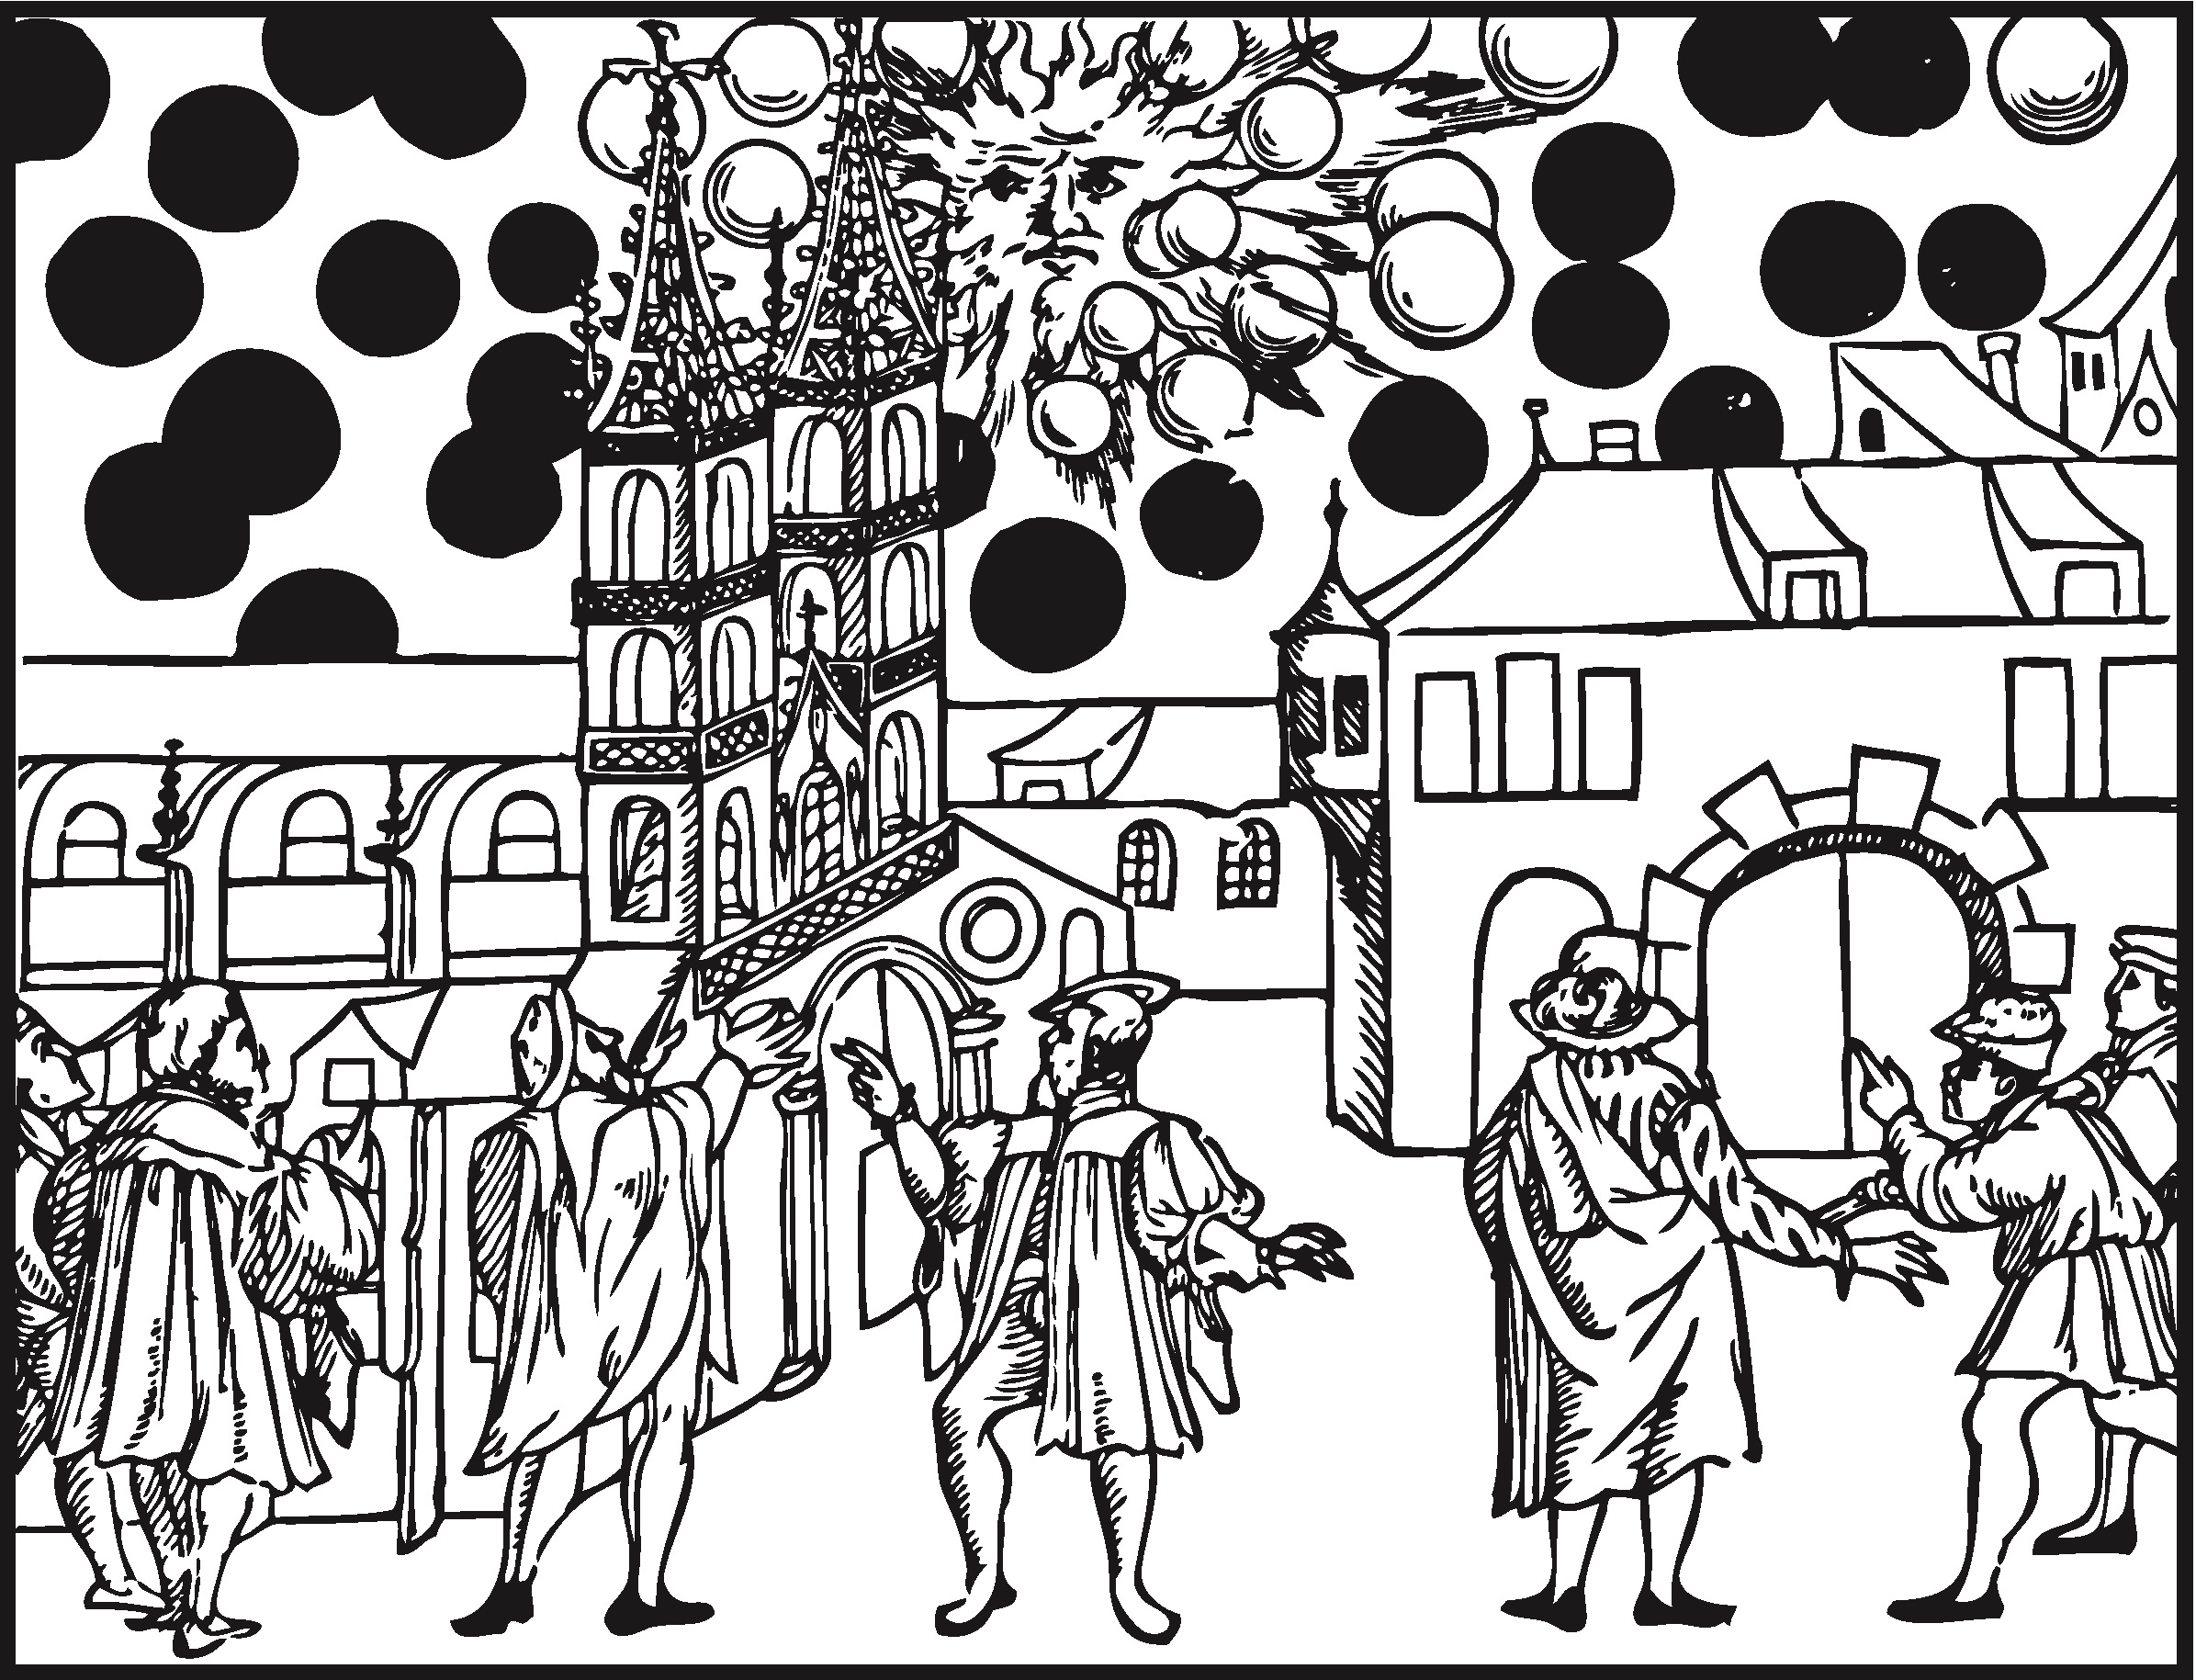 Woodcut of UFOs observed over the town of Basel in Switzerland.